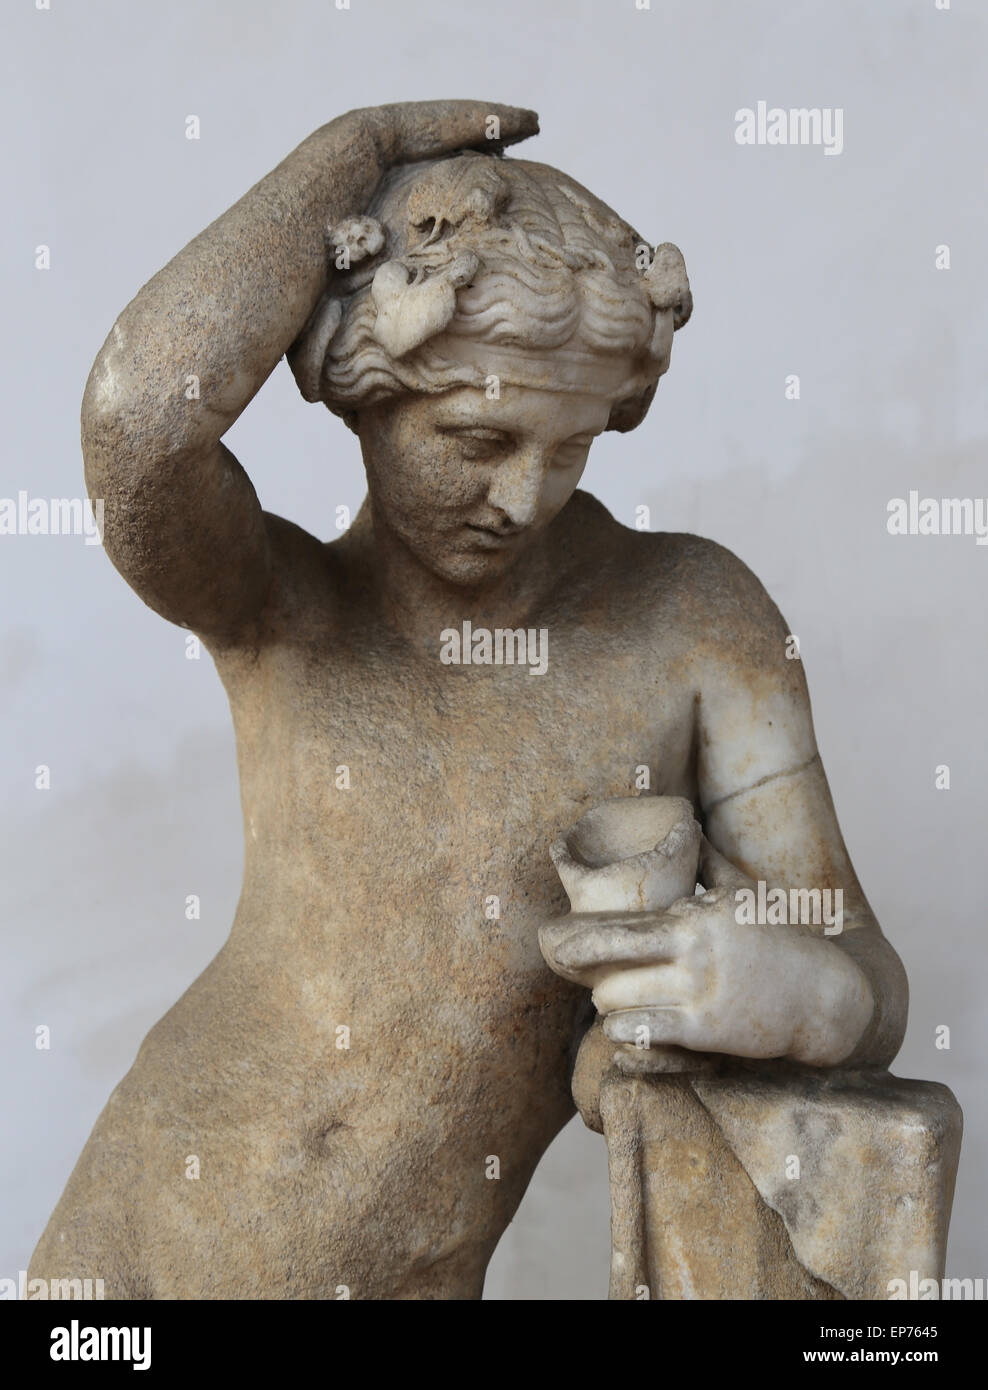 Statue of drunk Dionysus. Marble. 1st C. AD. Claudian Age. Rome. Via Cassia. National Roman Museum. Baths of Diocletian. Rome. Stock Photo